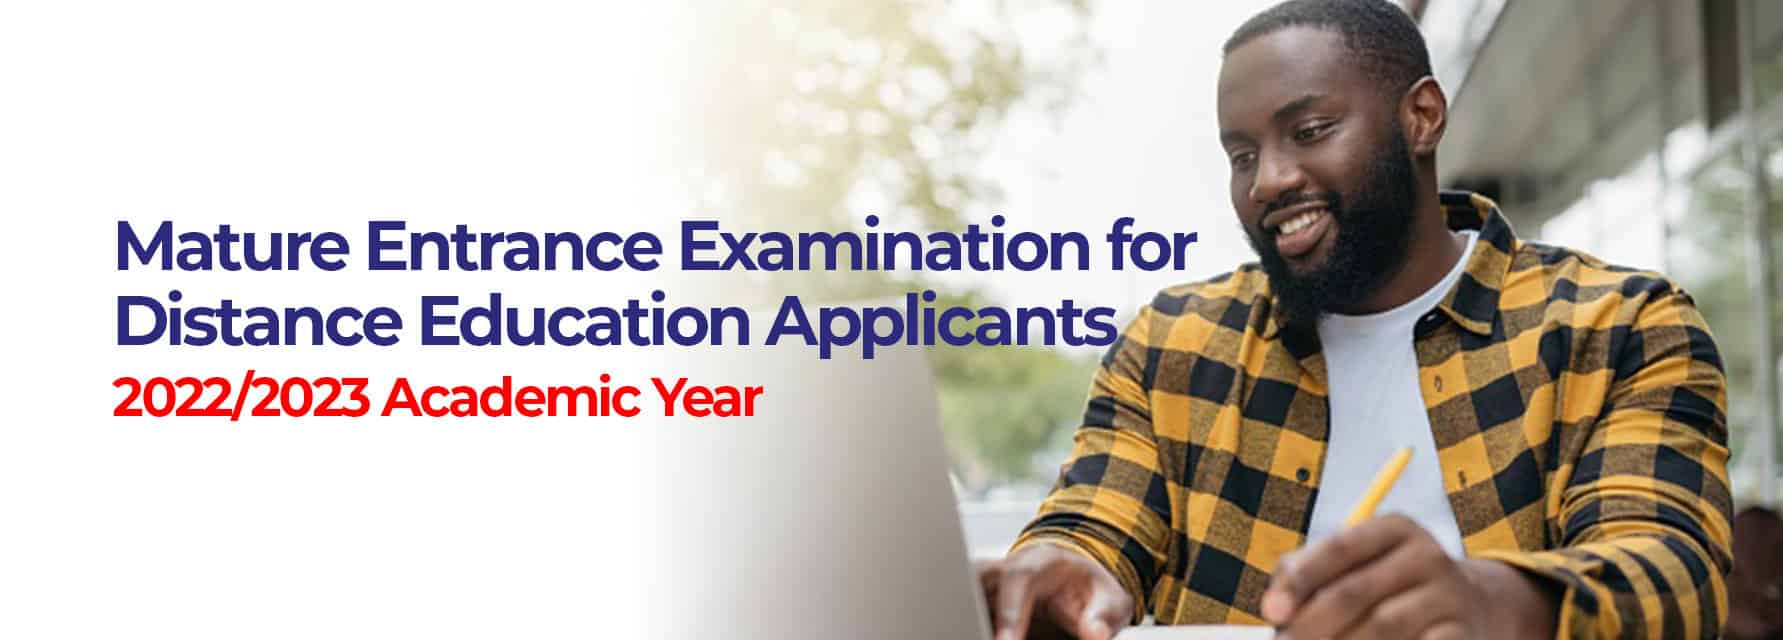 UEW Mature Entrance Examination for Distance Education Applicants 2022/2023